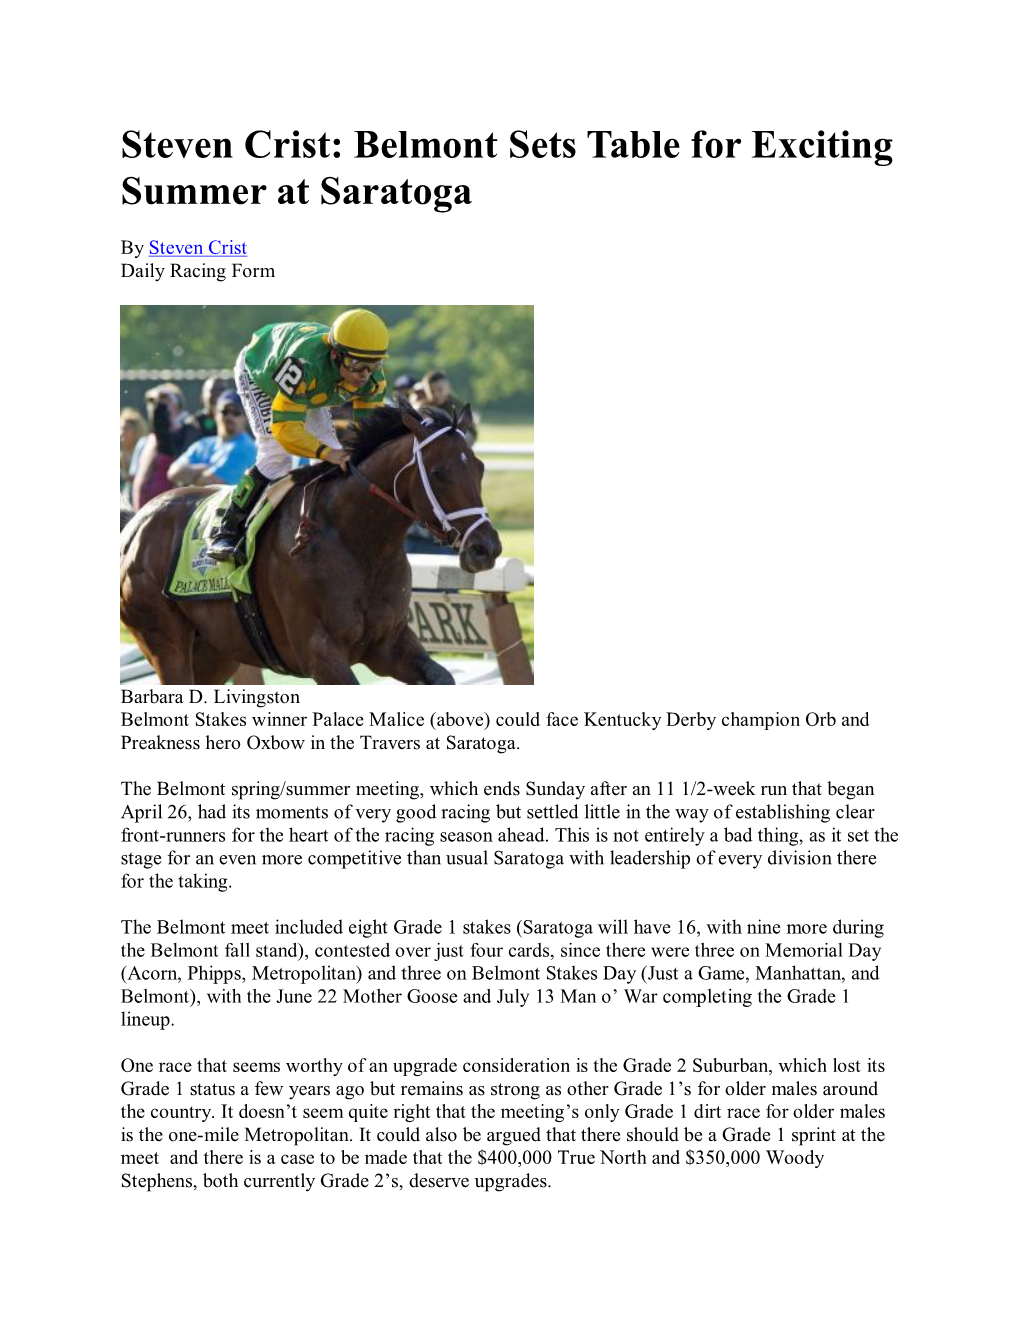 Steven Crist: Belmont Sets Table for Exciting Summer at Saratoga